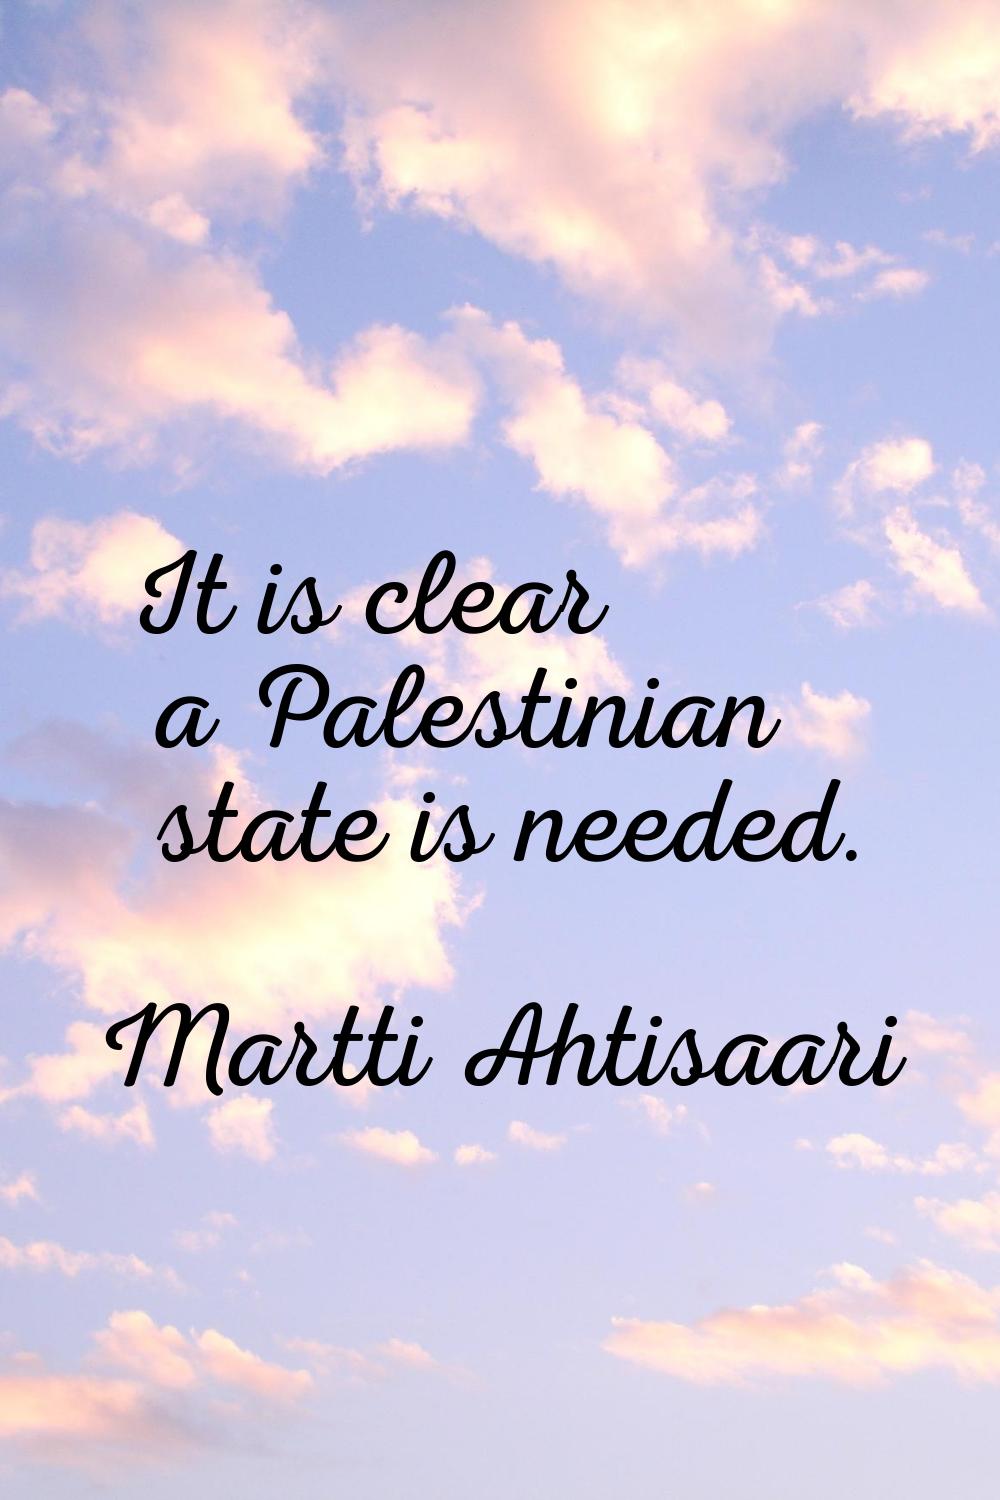 It is clear a Palestinian state is needed.